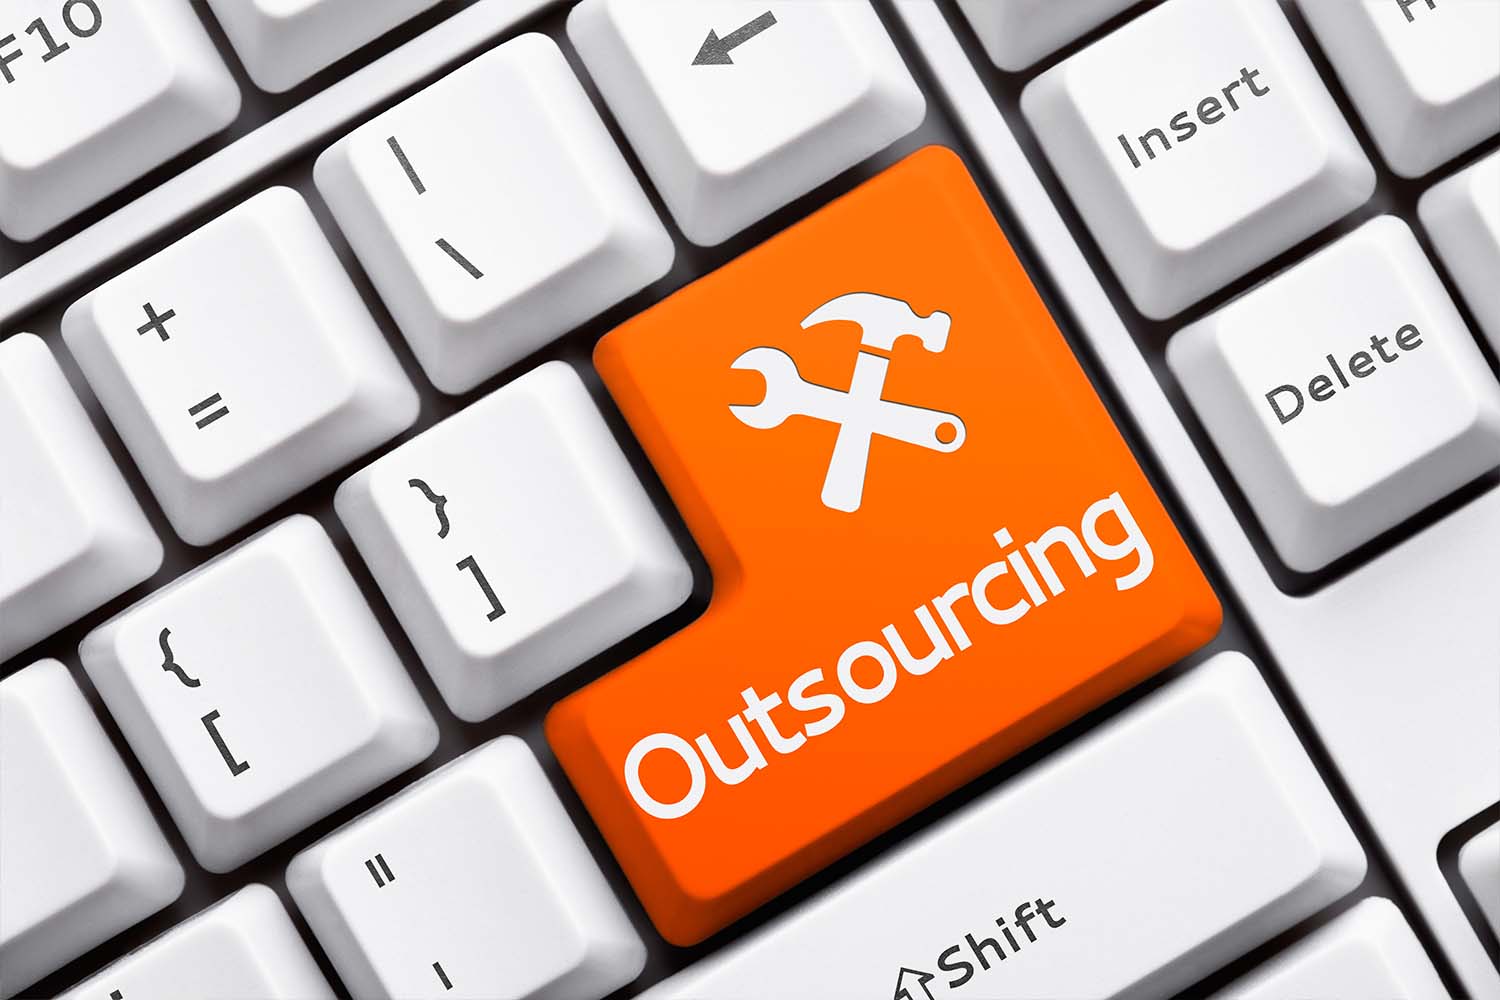 What Is Business Process Outsourcing (BPO)?